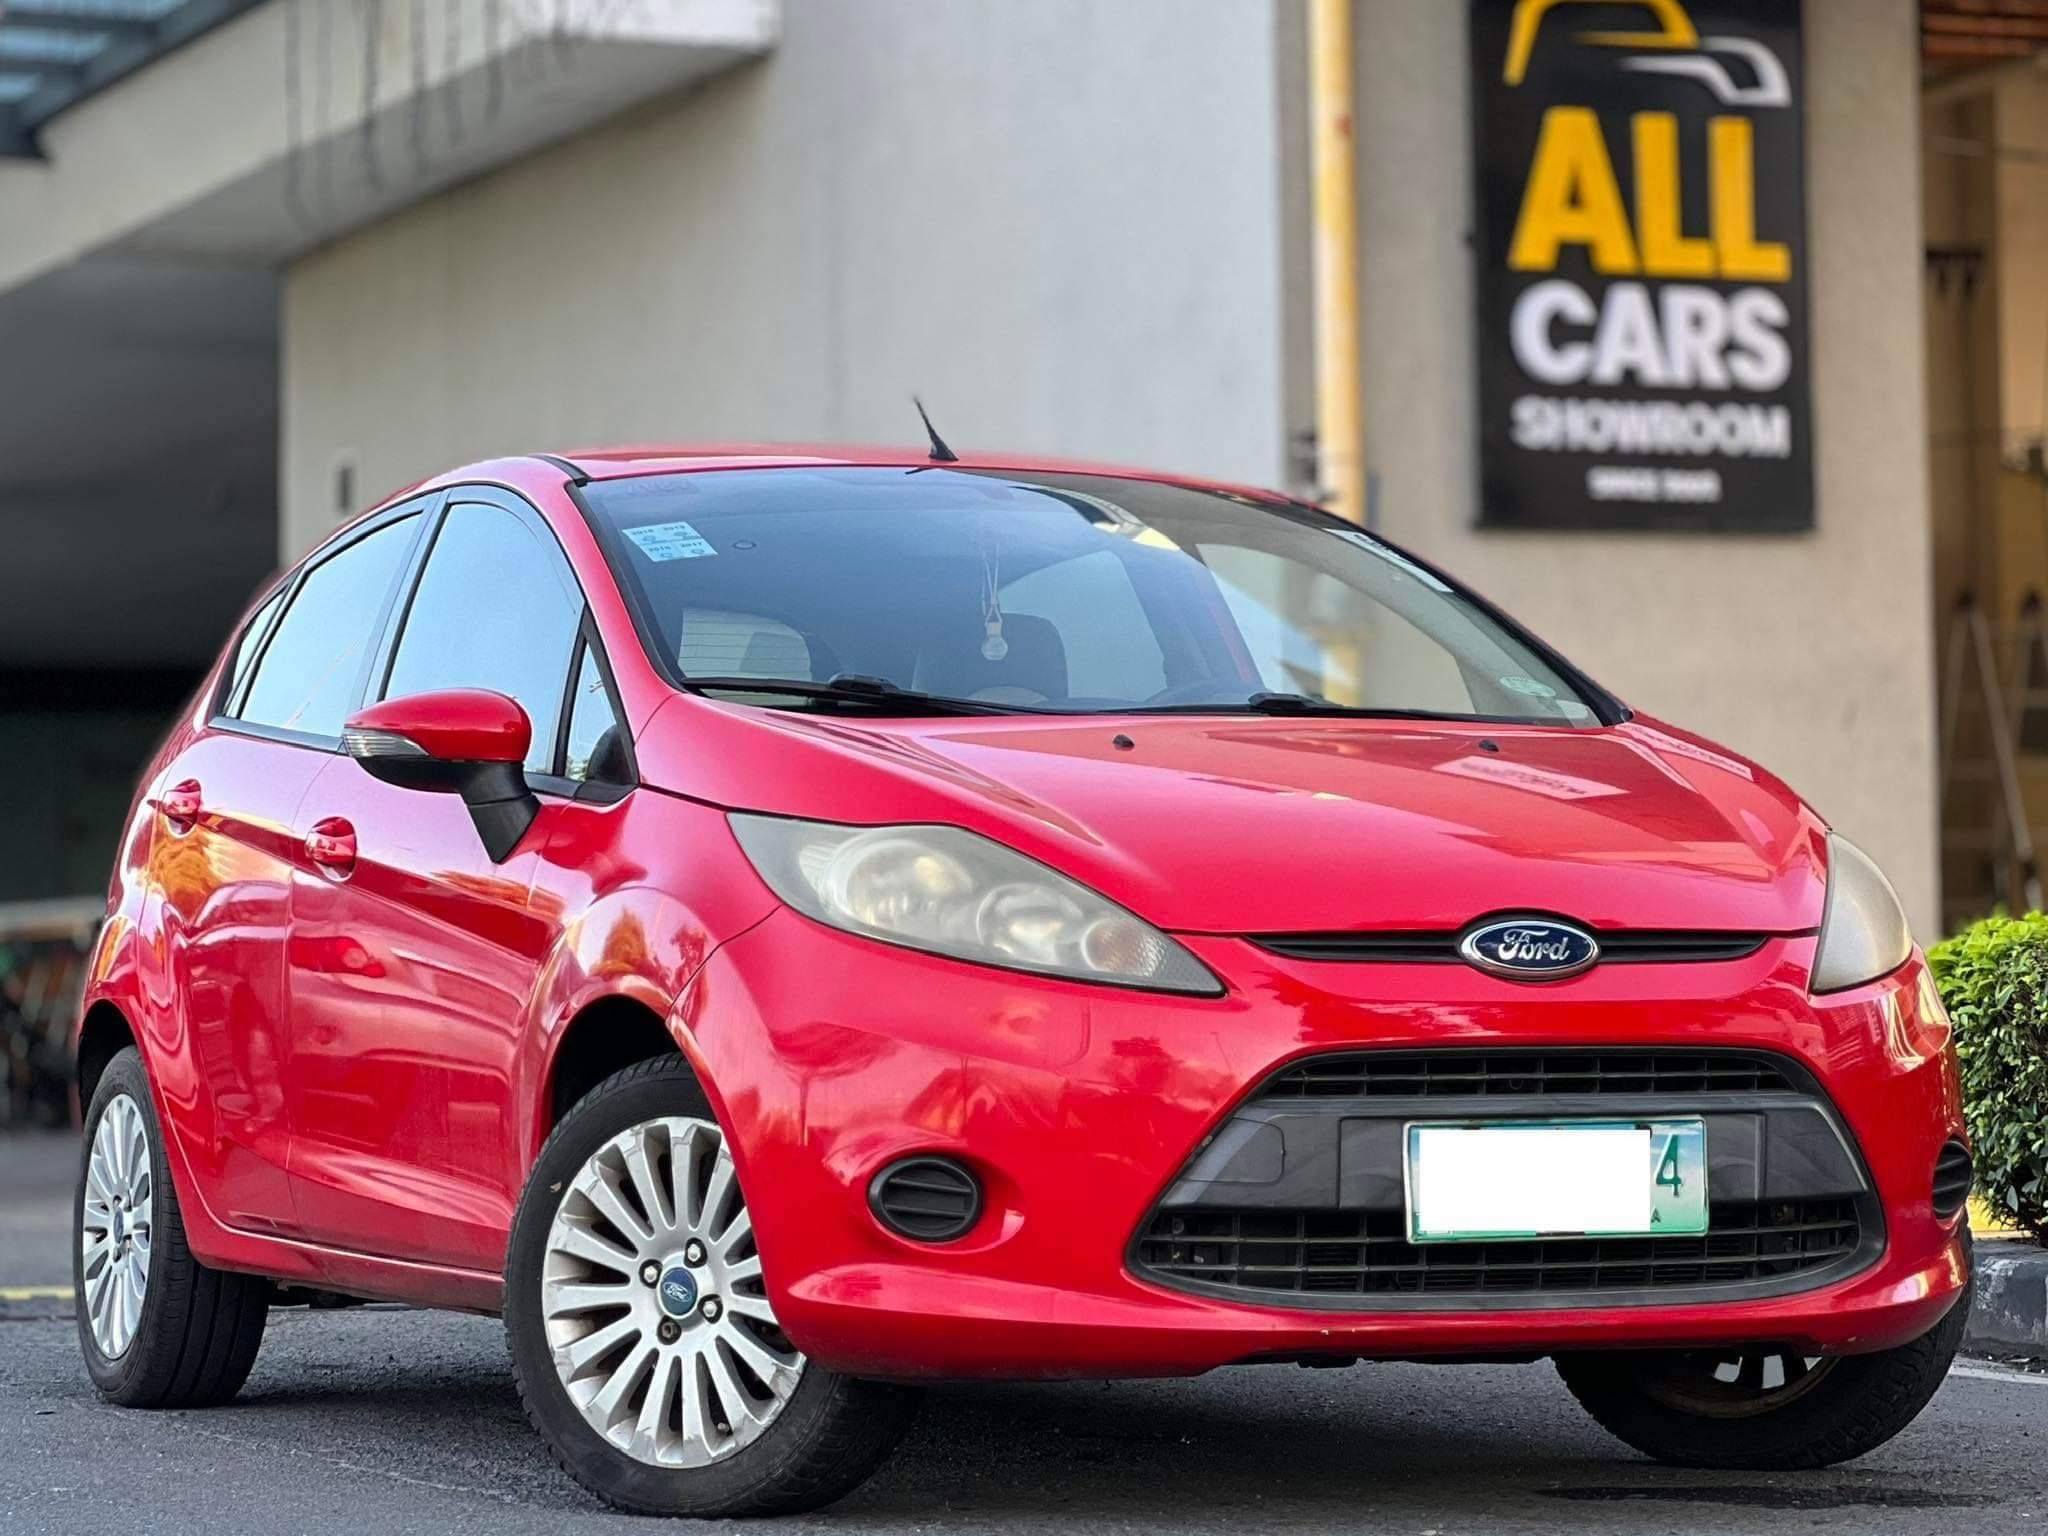 Used 2012 Ford Fiesta Hatchback 1.4L Trend AT